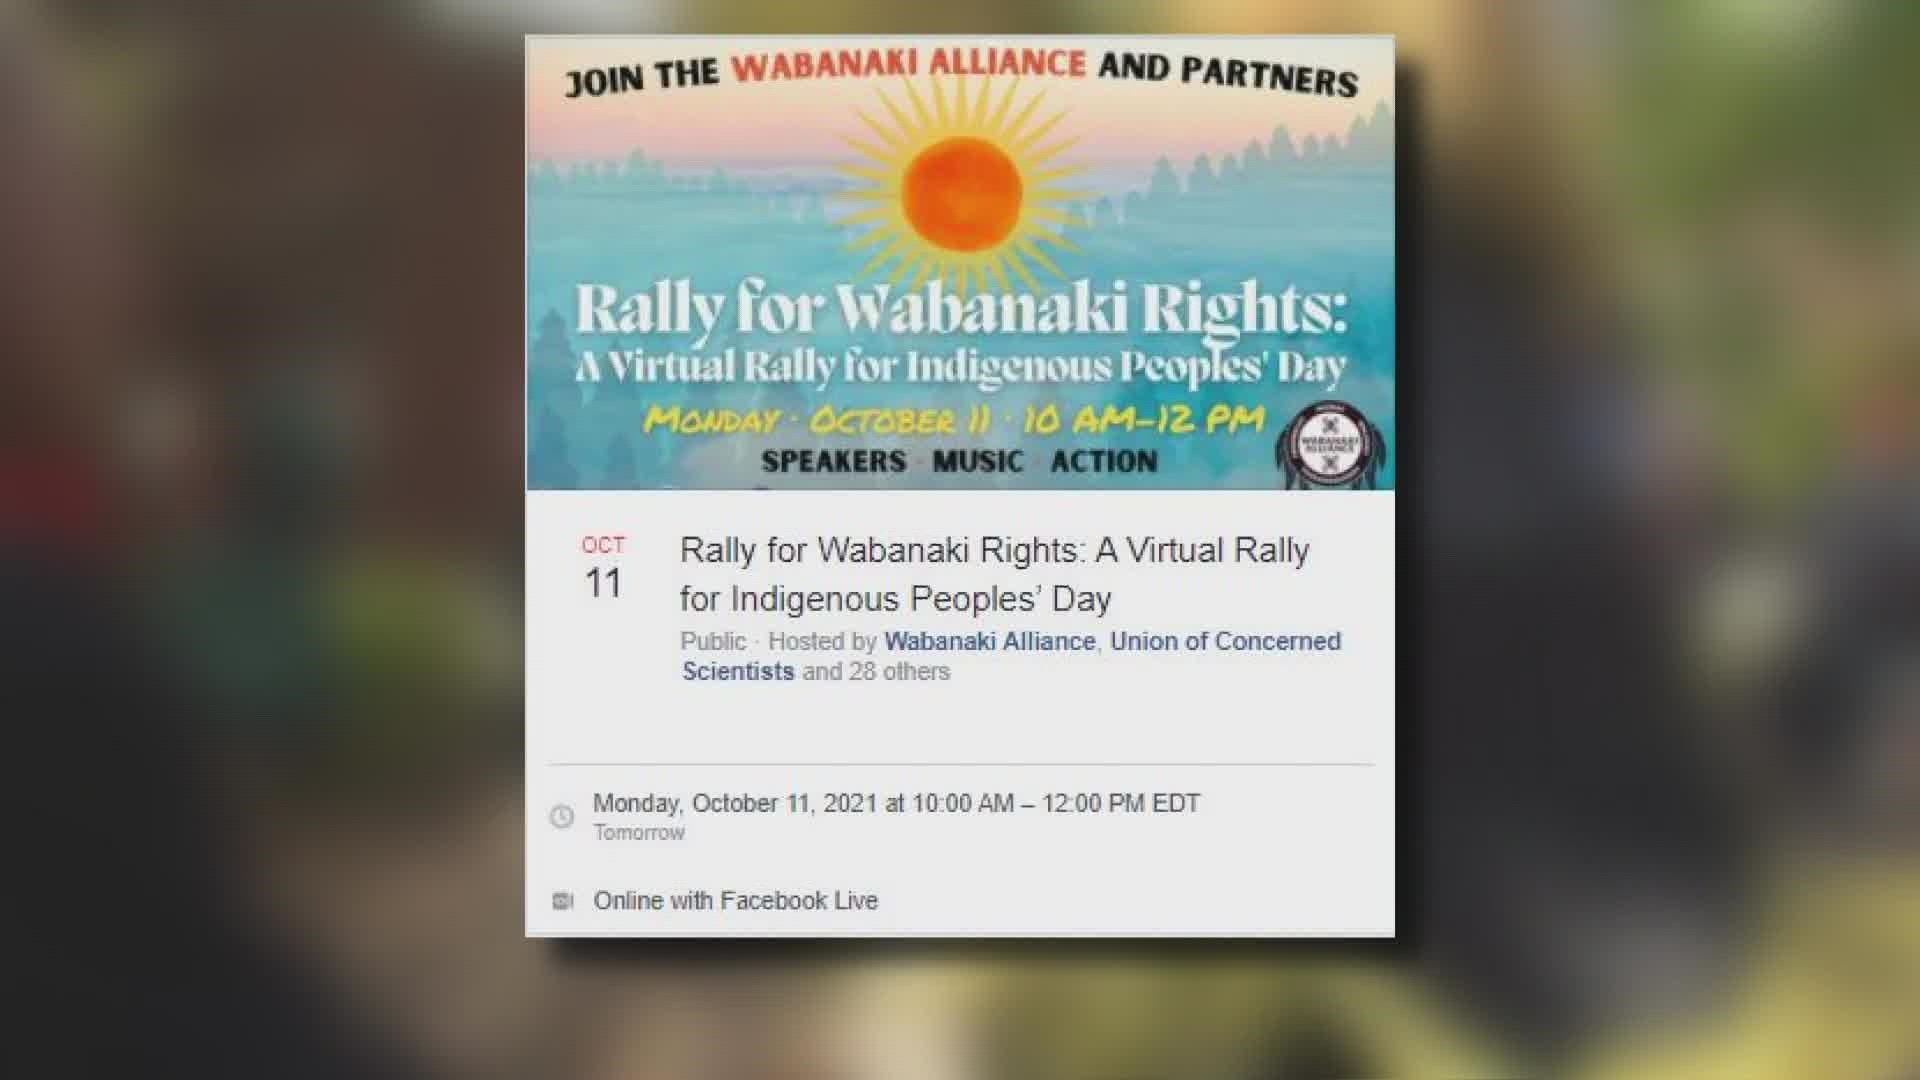 The event is organized by the Wabanaki Alliance alone with other groups, and will be posted on Facebook Live.